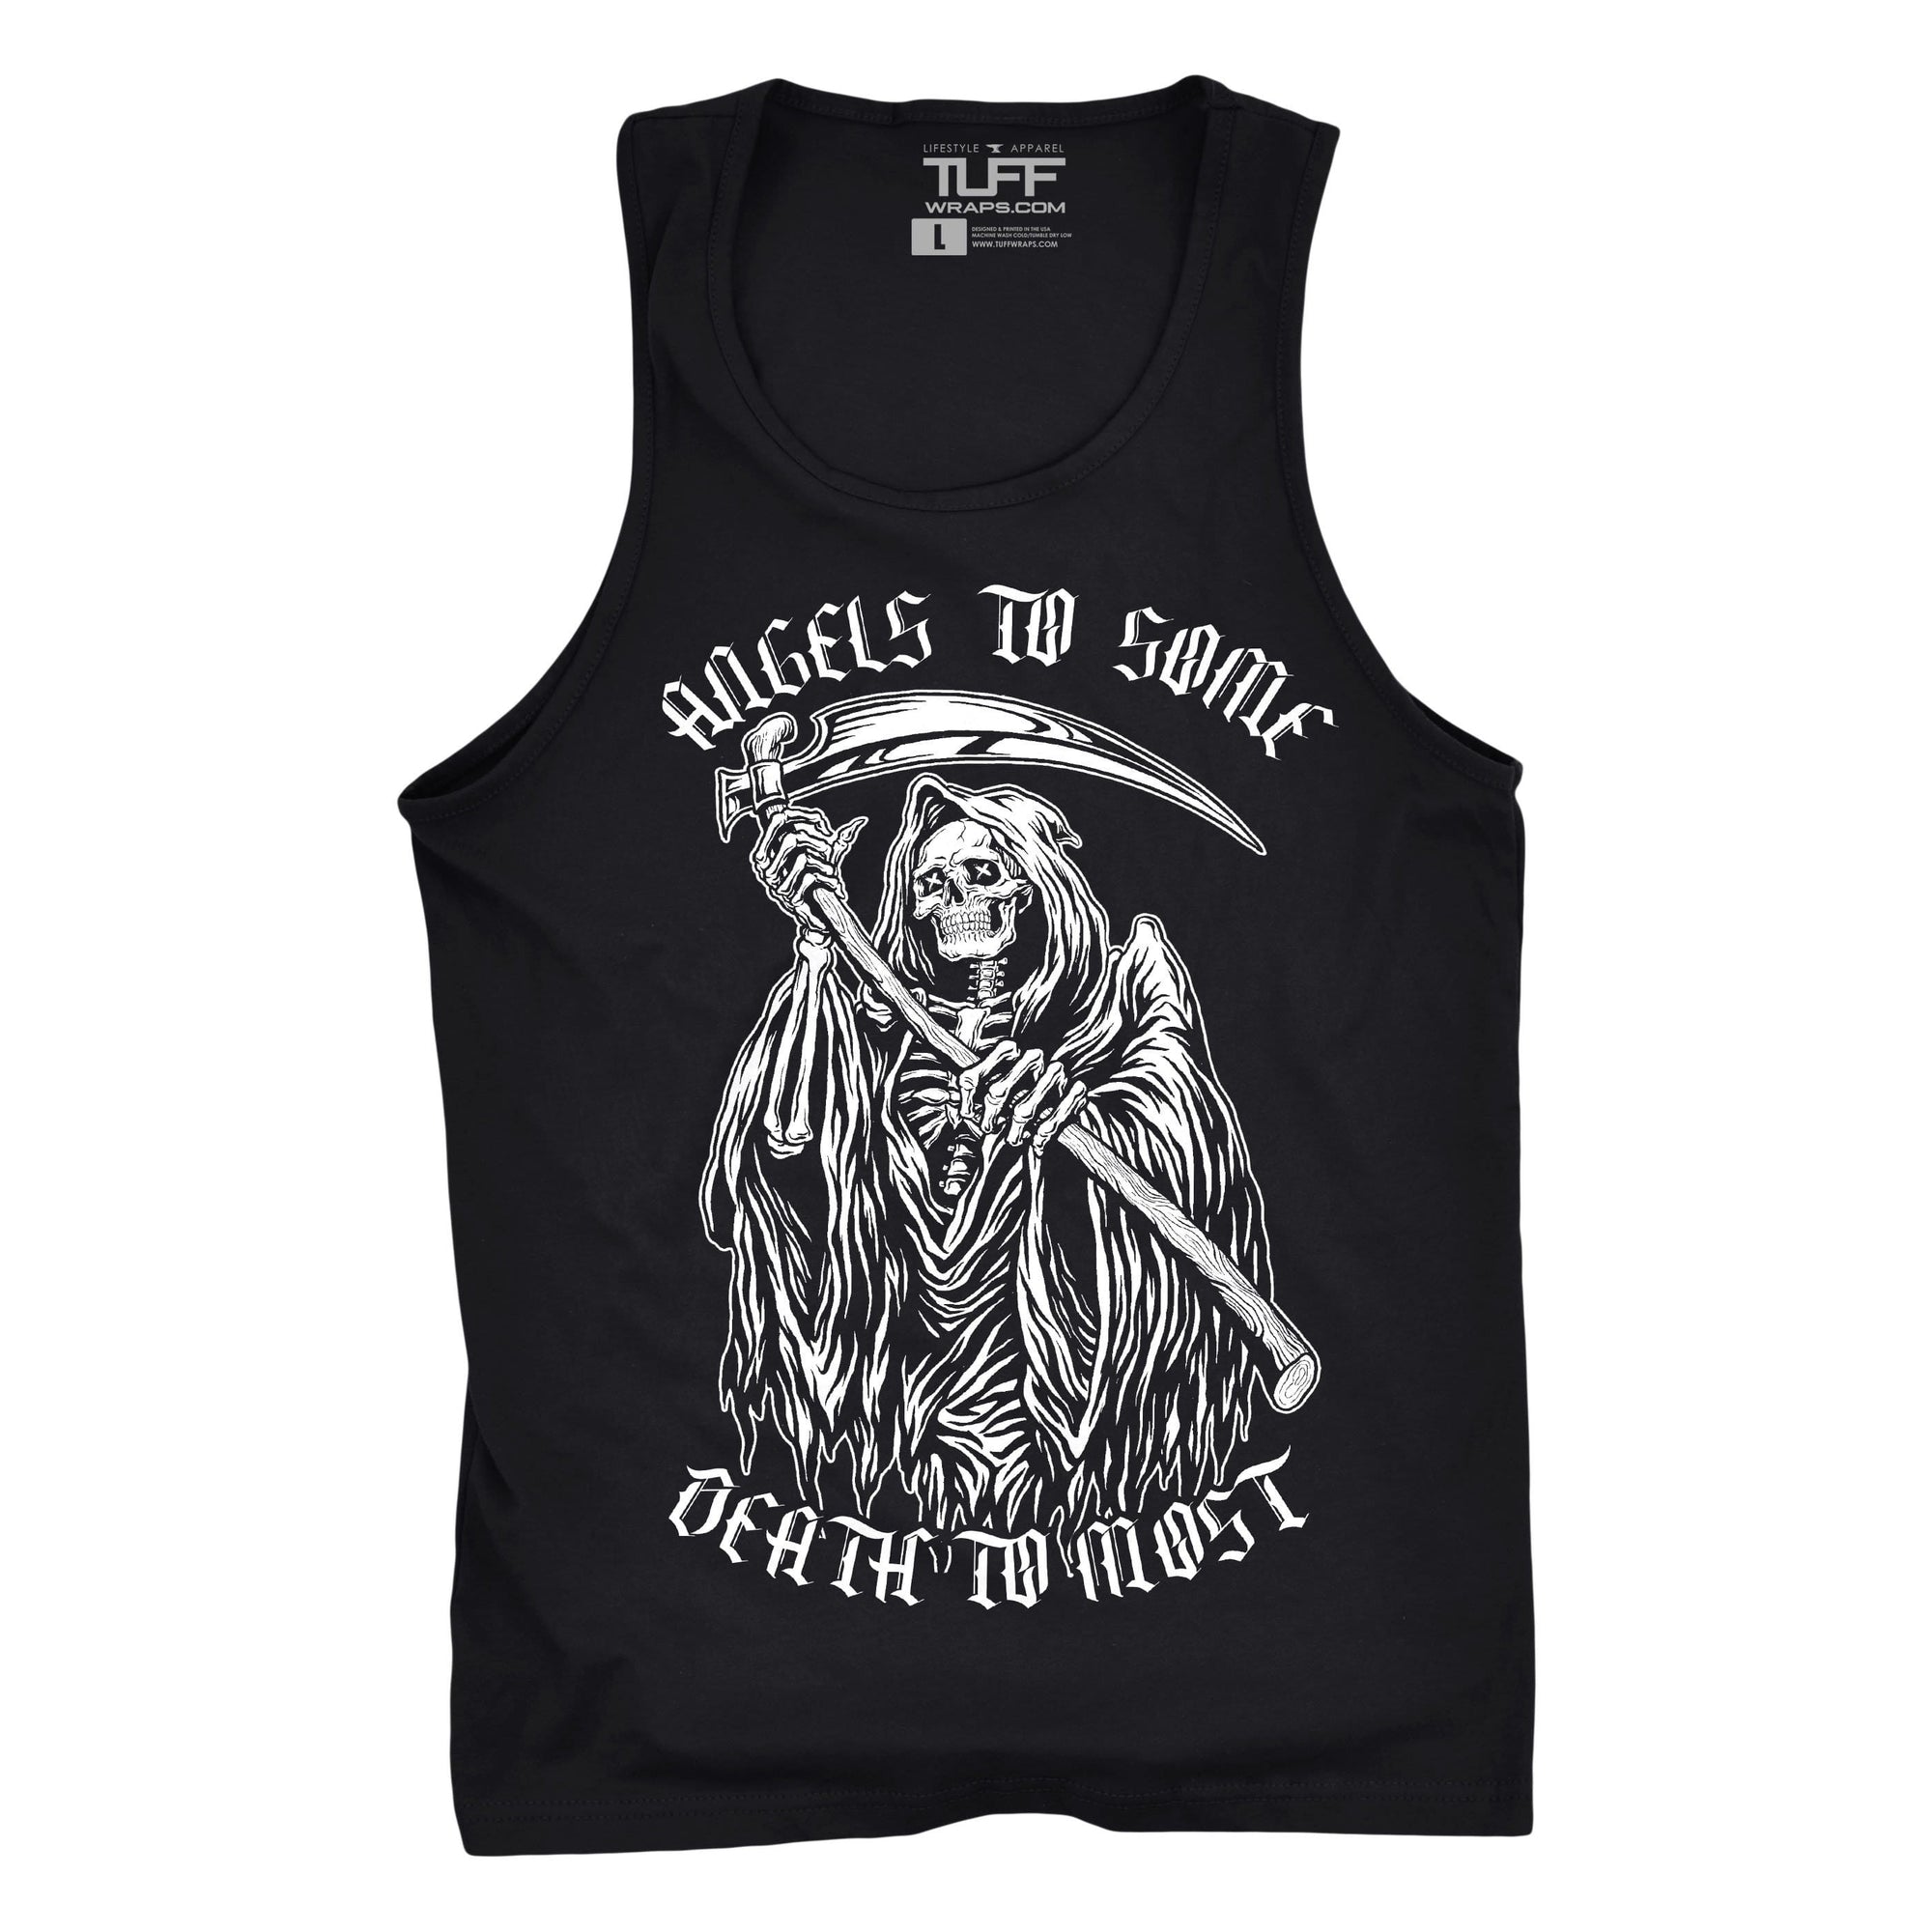 Angels to Some, Death to Most Tank Men's Tank Tops